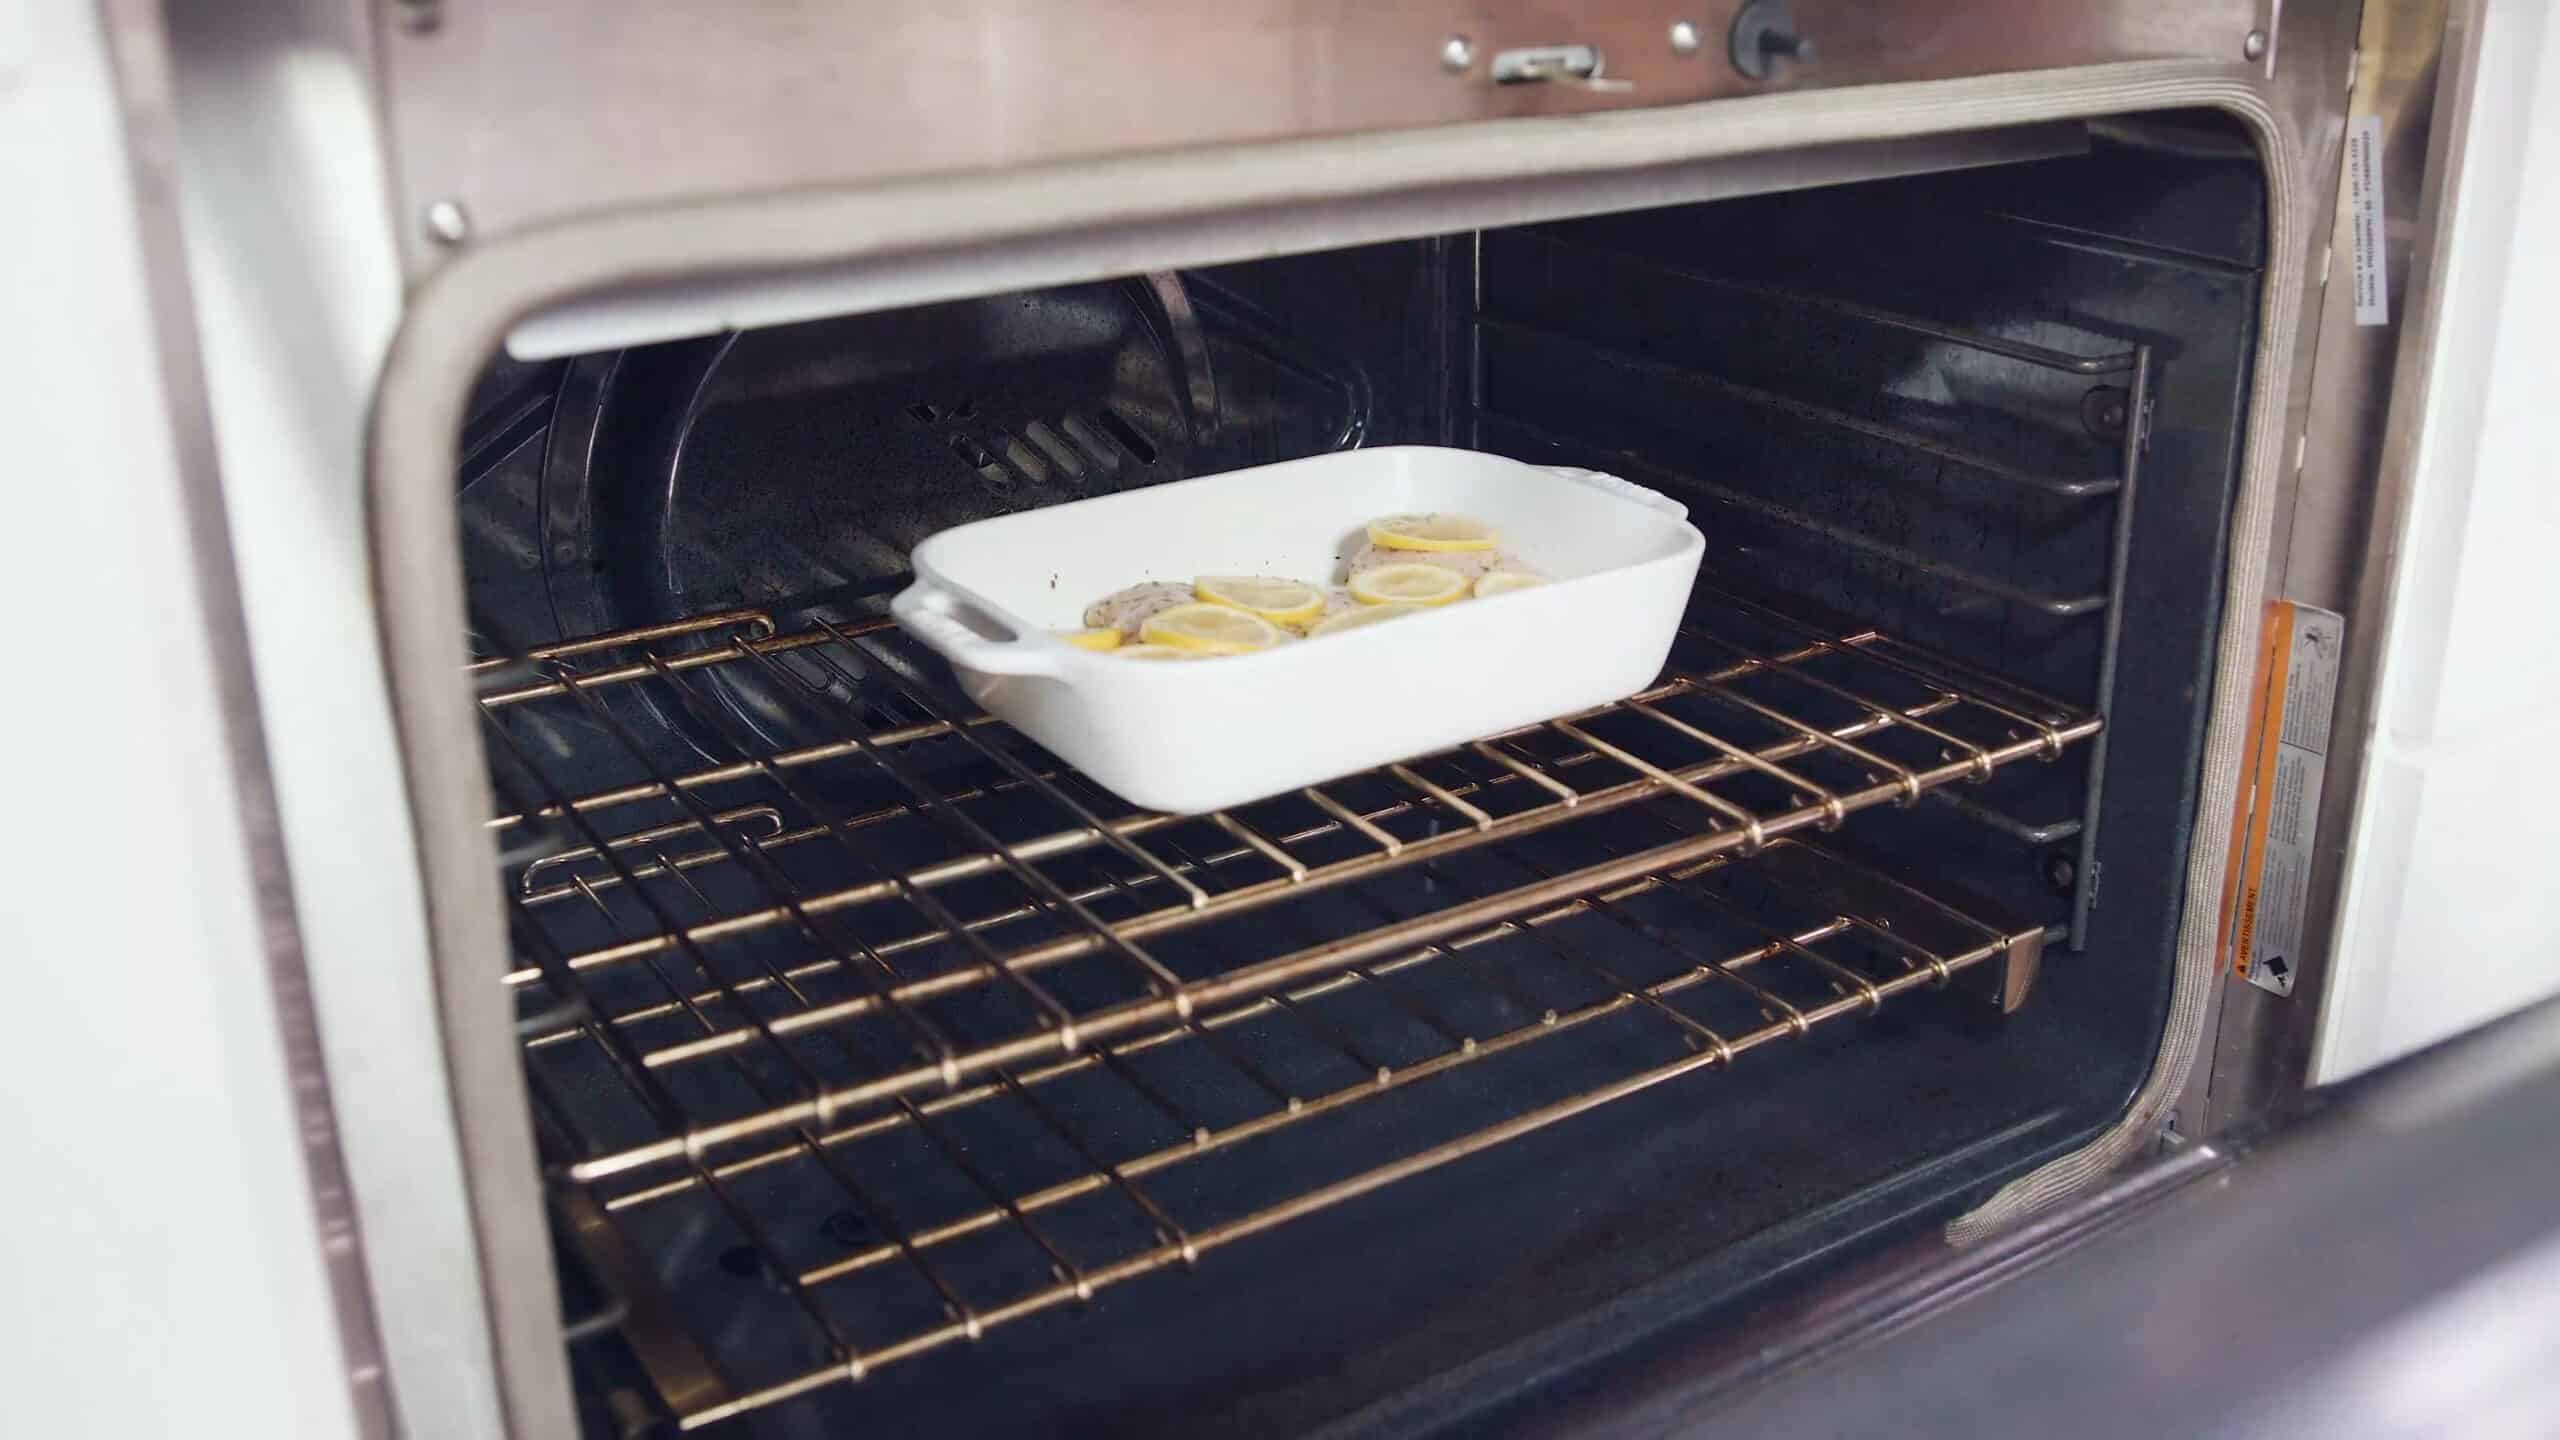 Angled view of an open oven with a white glass casserole dish filled with lemon and herb marinated chicken breasts and topped with lemon slices all on a metal rack in the middle of the oven.